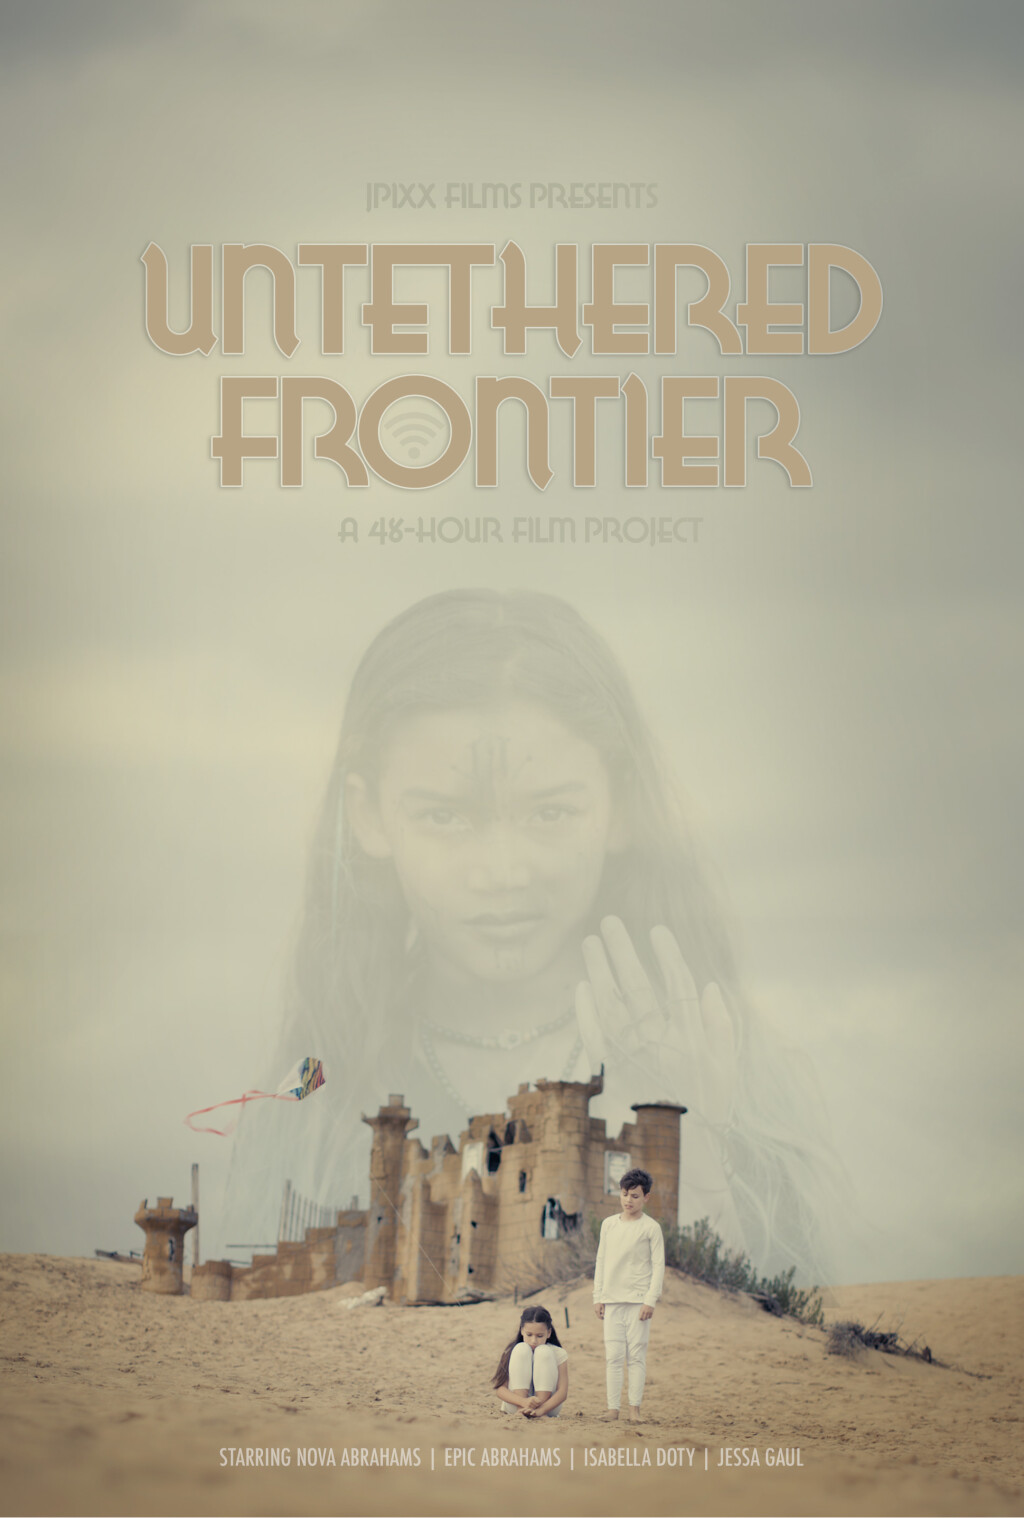 Filmposter for Untethered Frontier